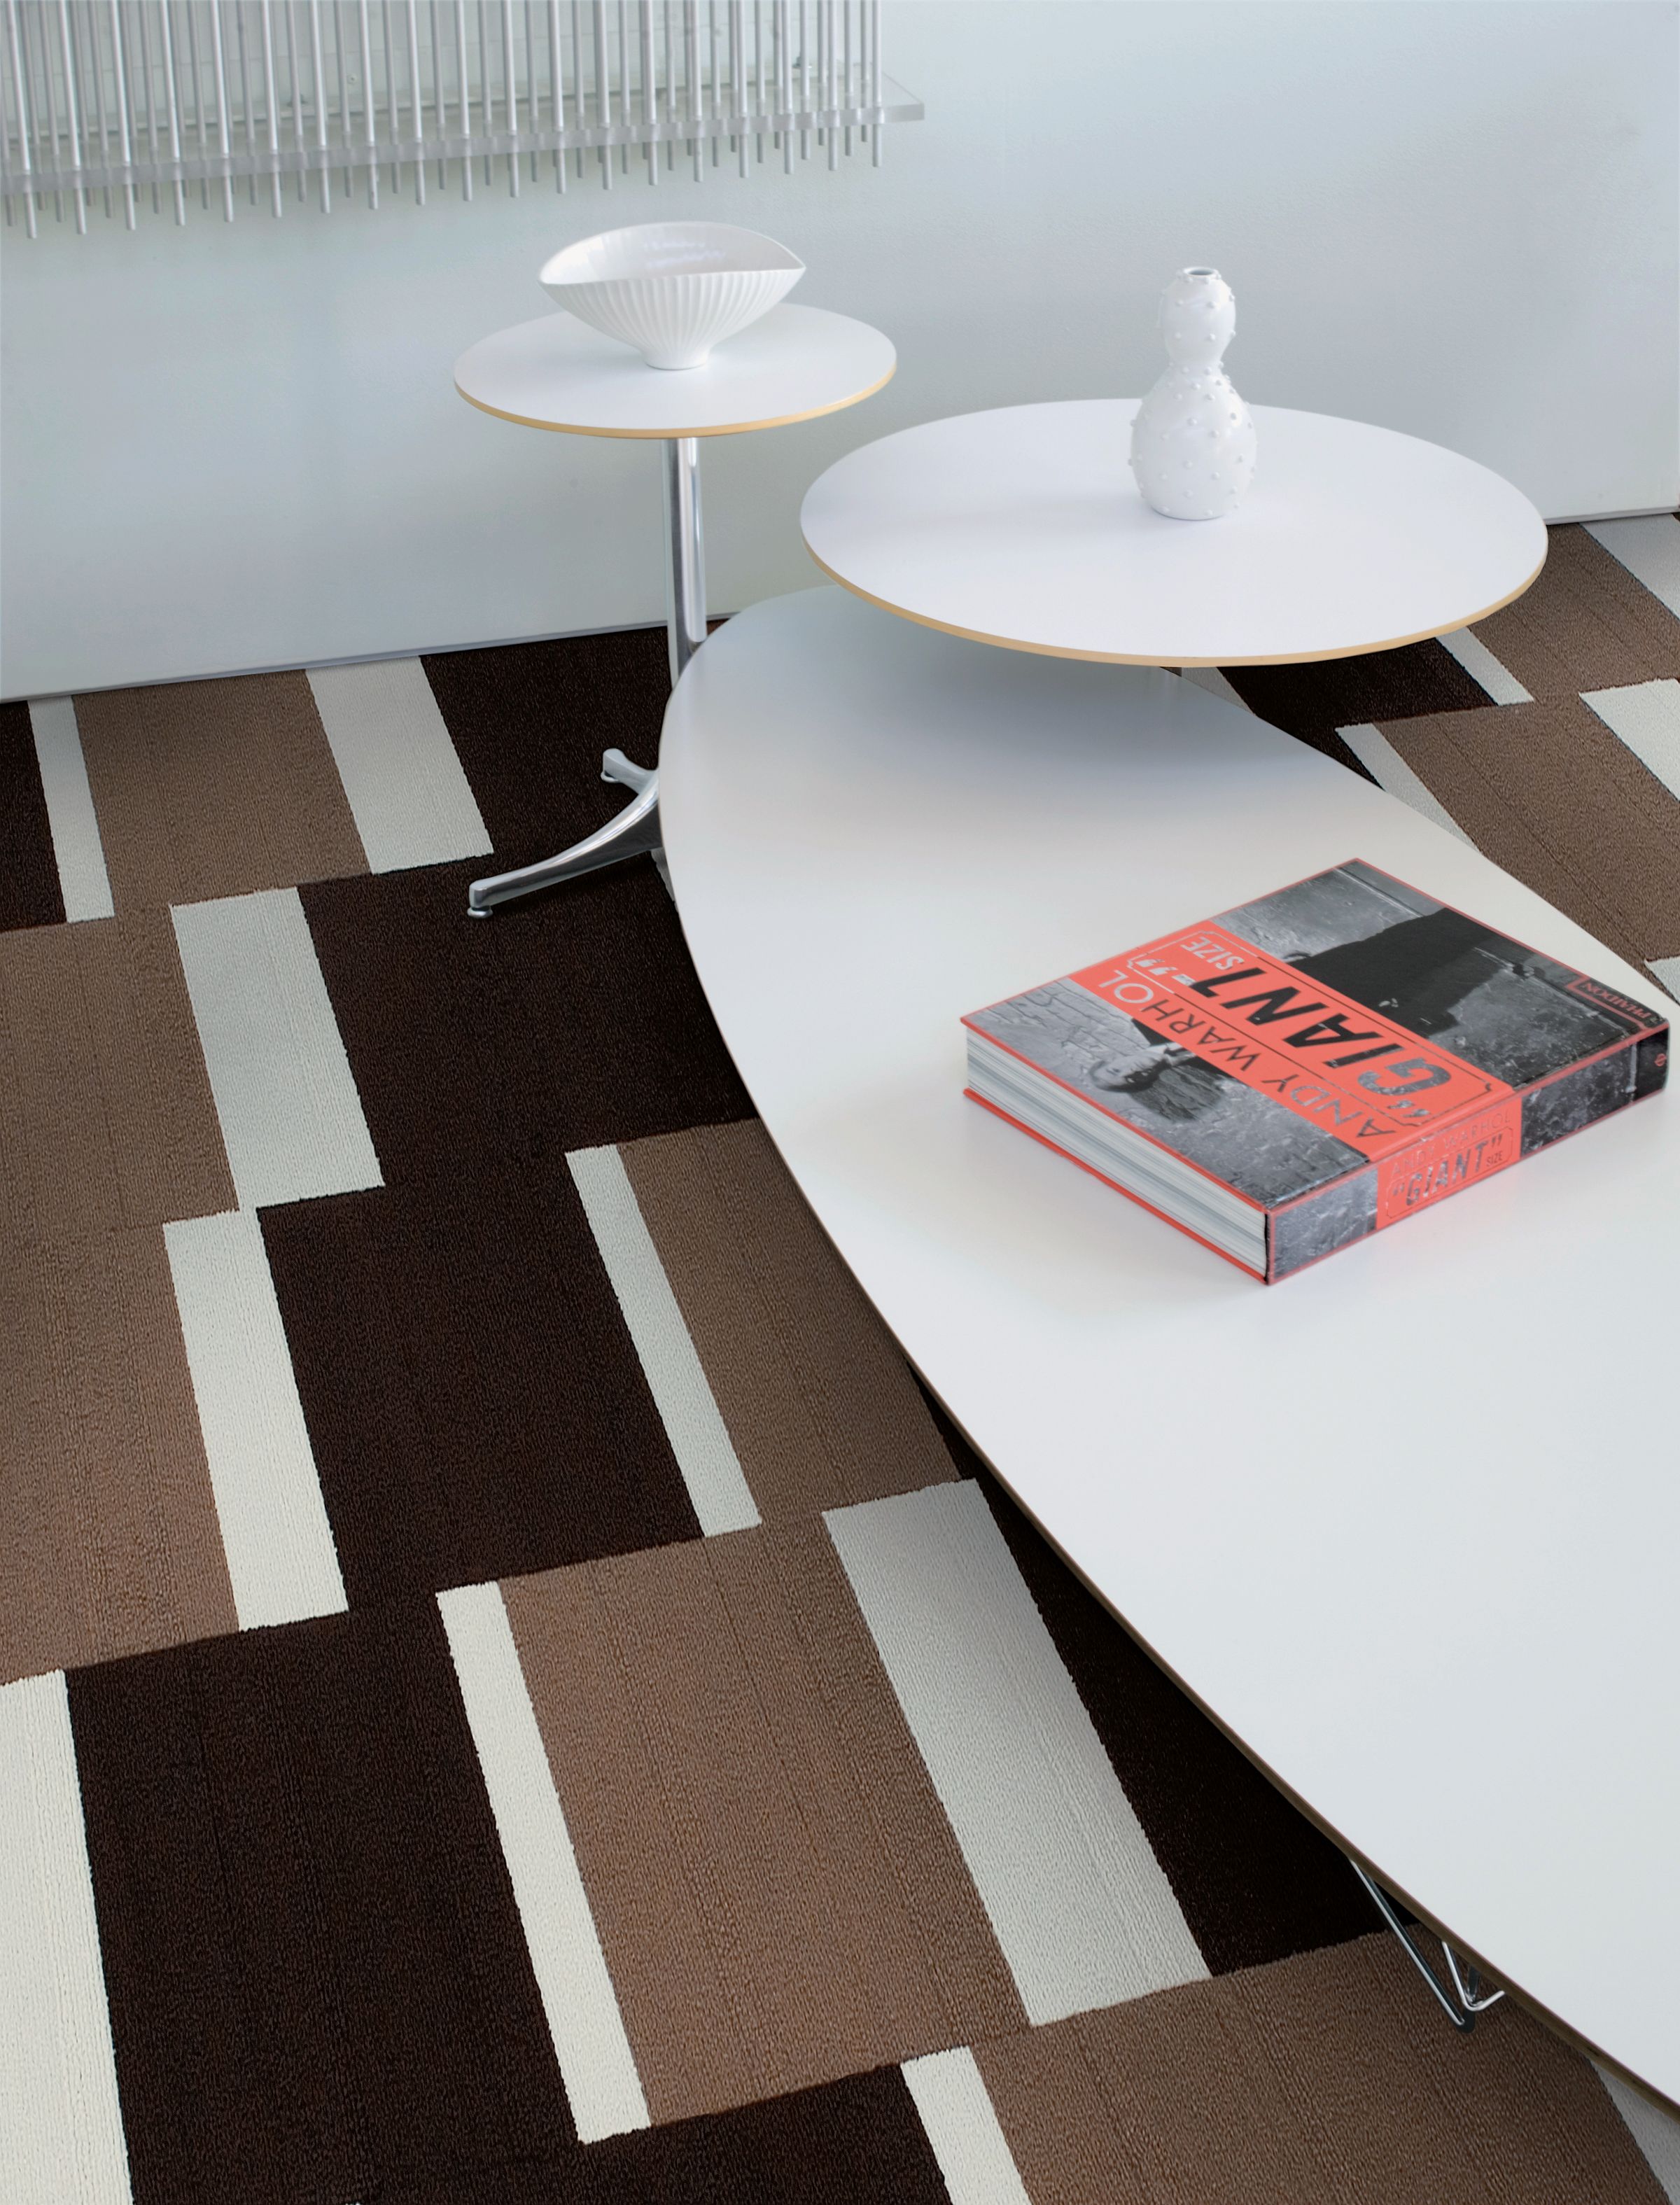 Interface Sew Retro carpet tile in modern office with white tables and large book imagen número 1